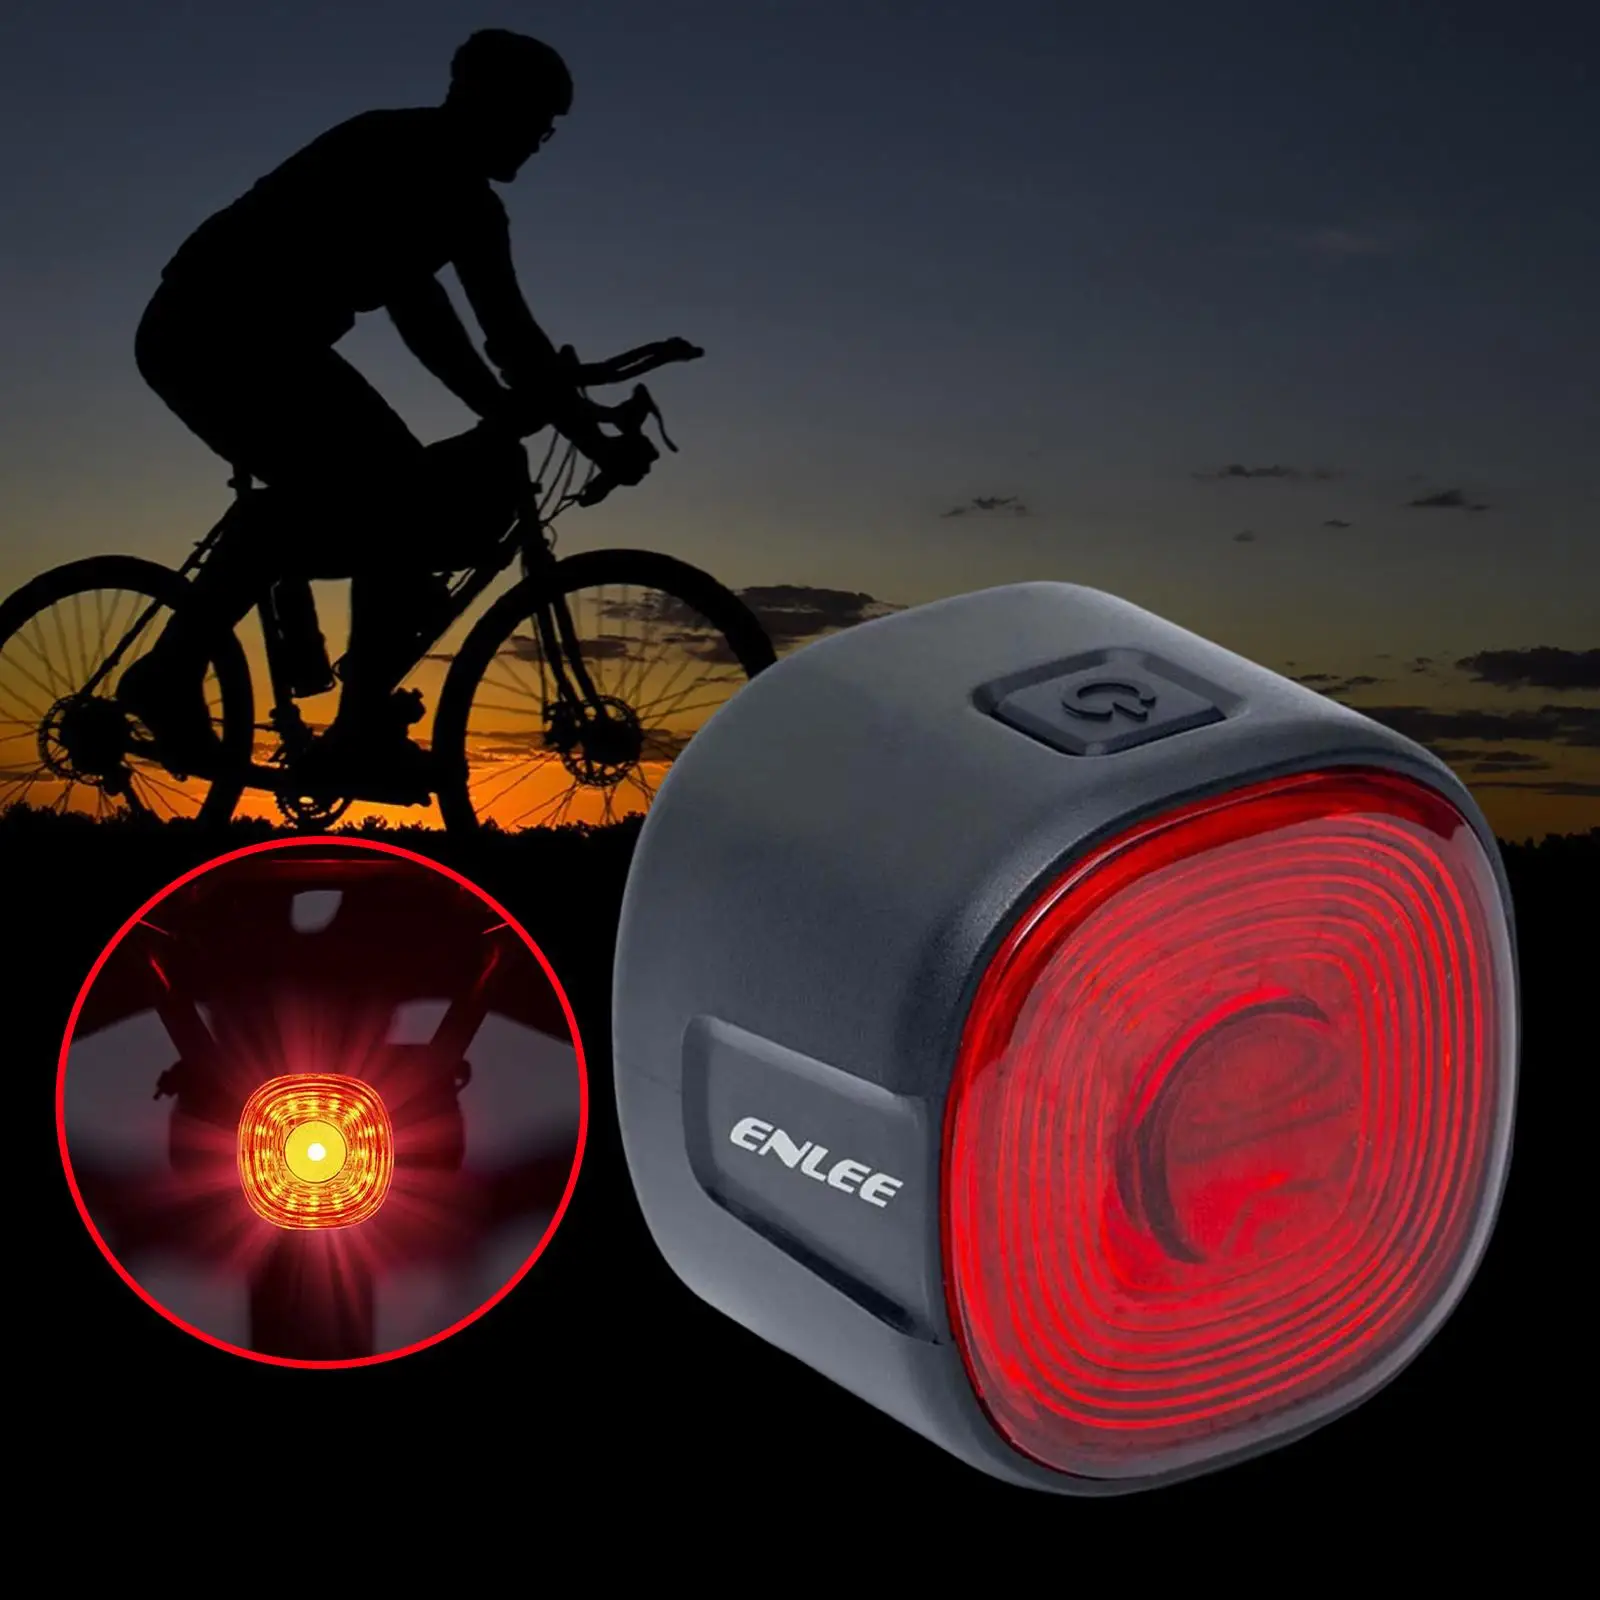 Light Brake Rear Lights USB Rechargeable Cycling Light IP66 Waterprooflight for Road Night Riding Accessory